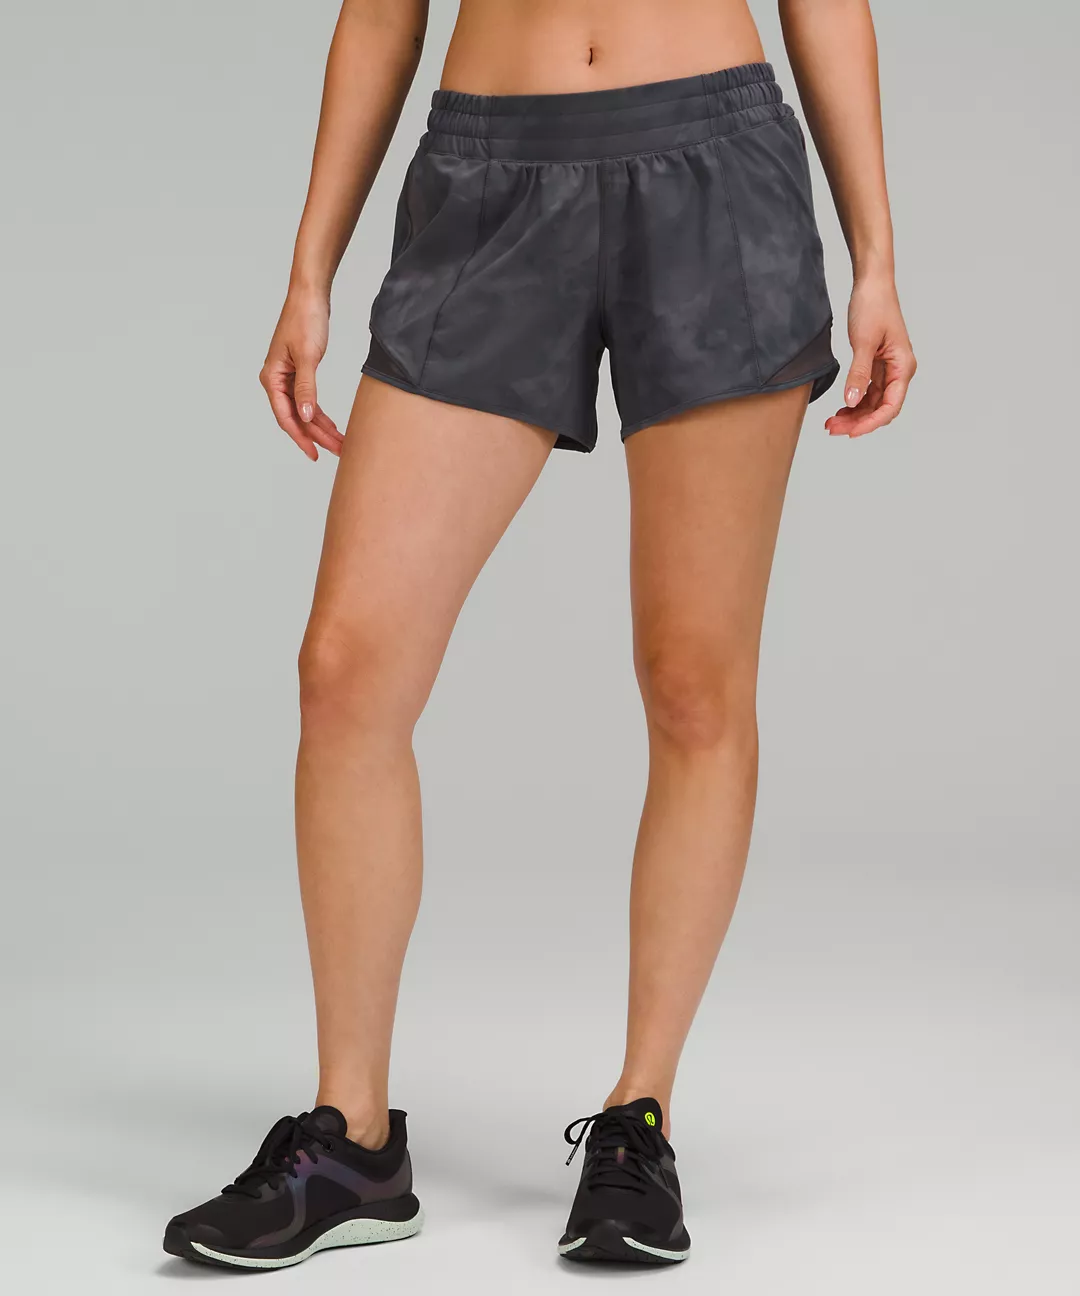 A lululemon Hotty Hot Low-Rise Lined Short 4"